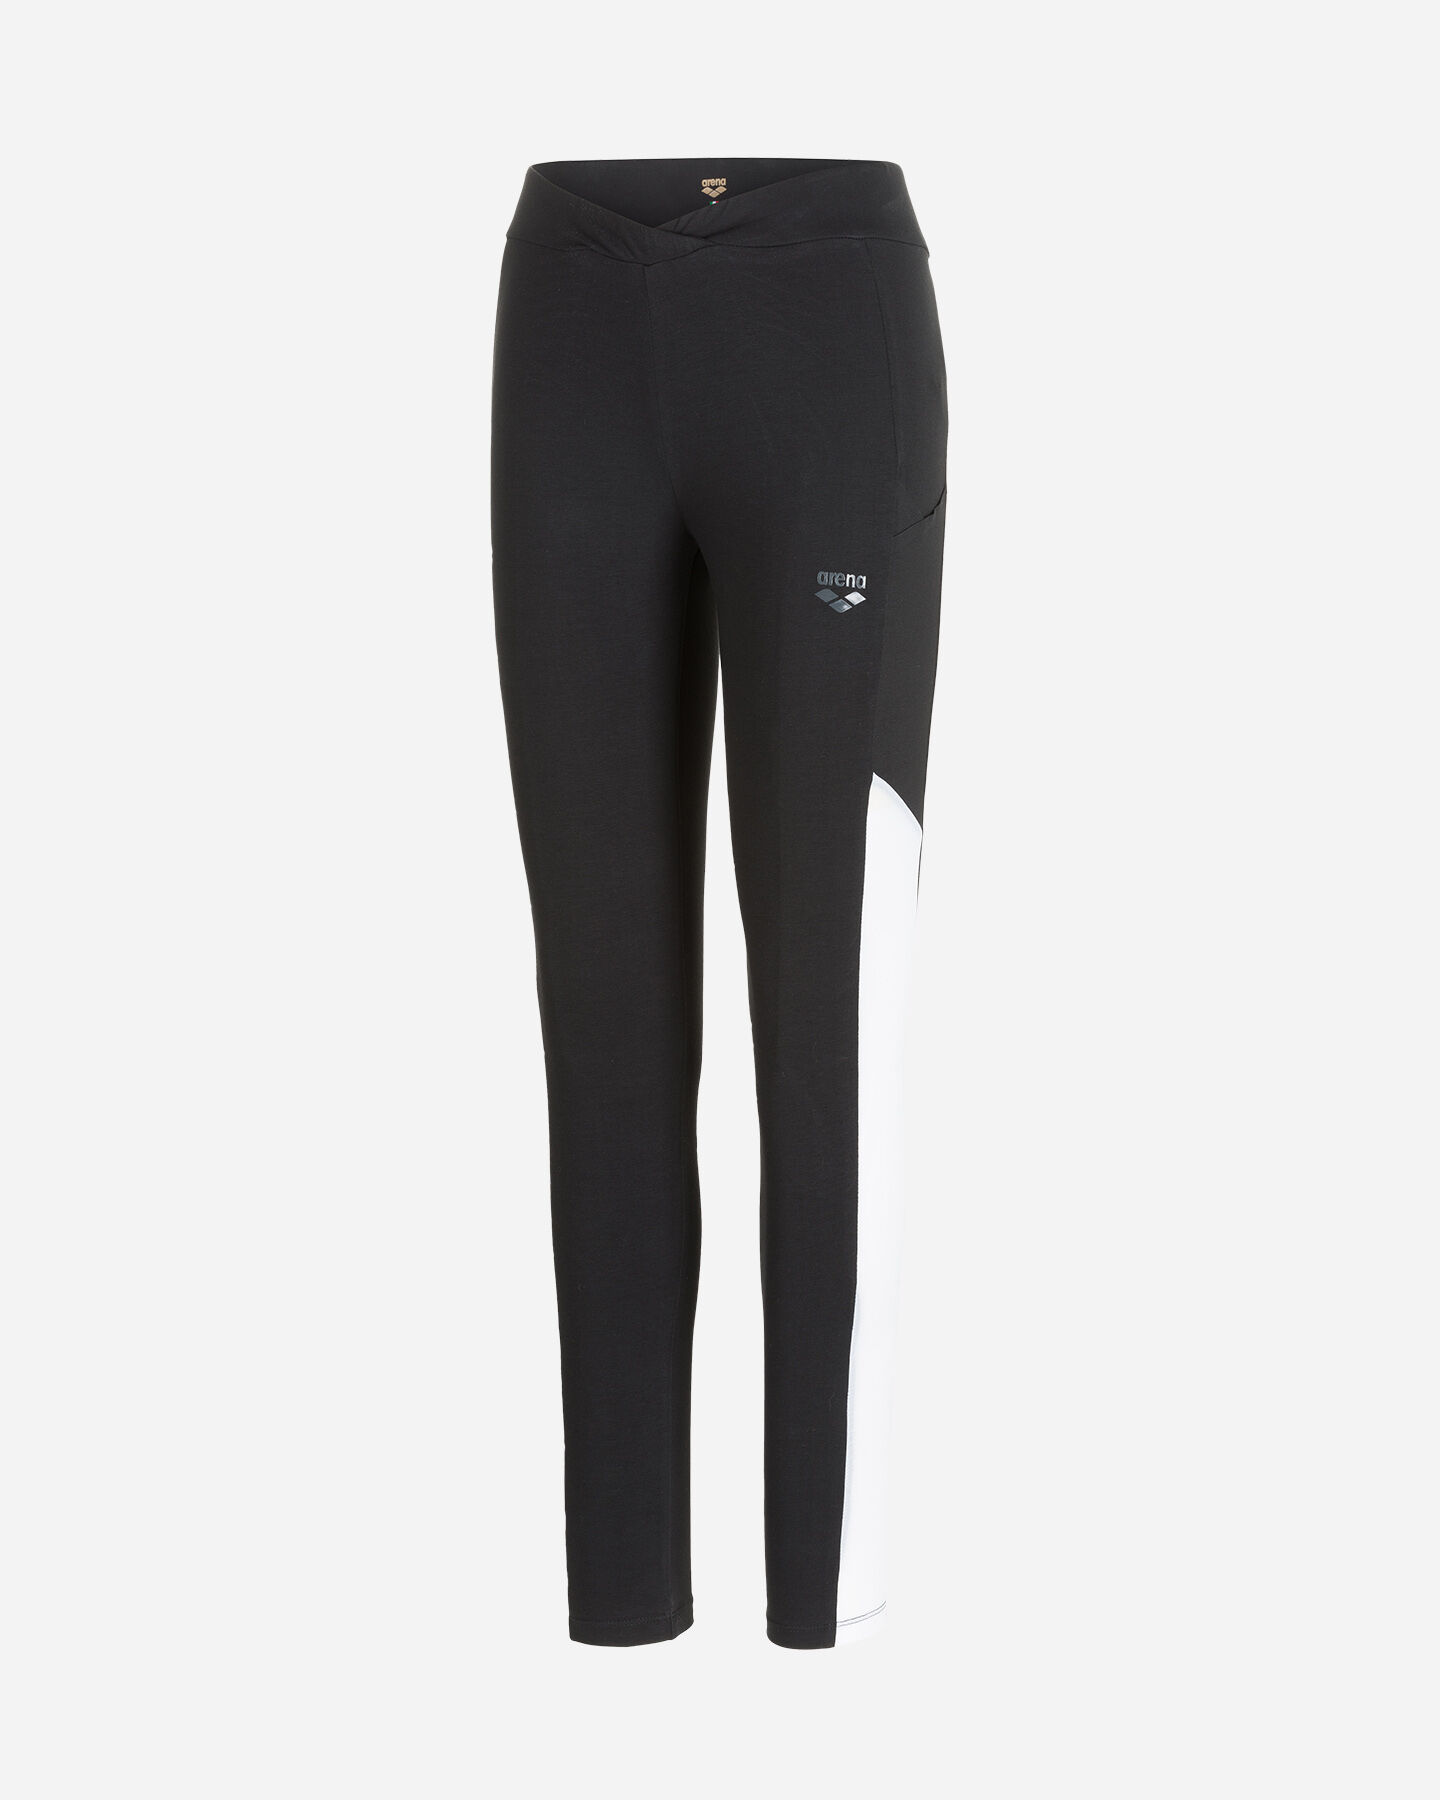  Leggings ARENA JSTRETCH  W S4080643|050|XS scatto 0